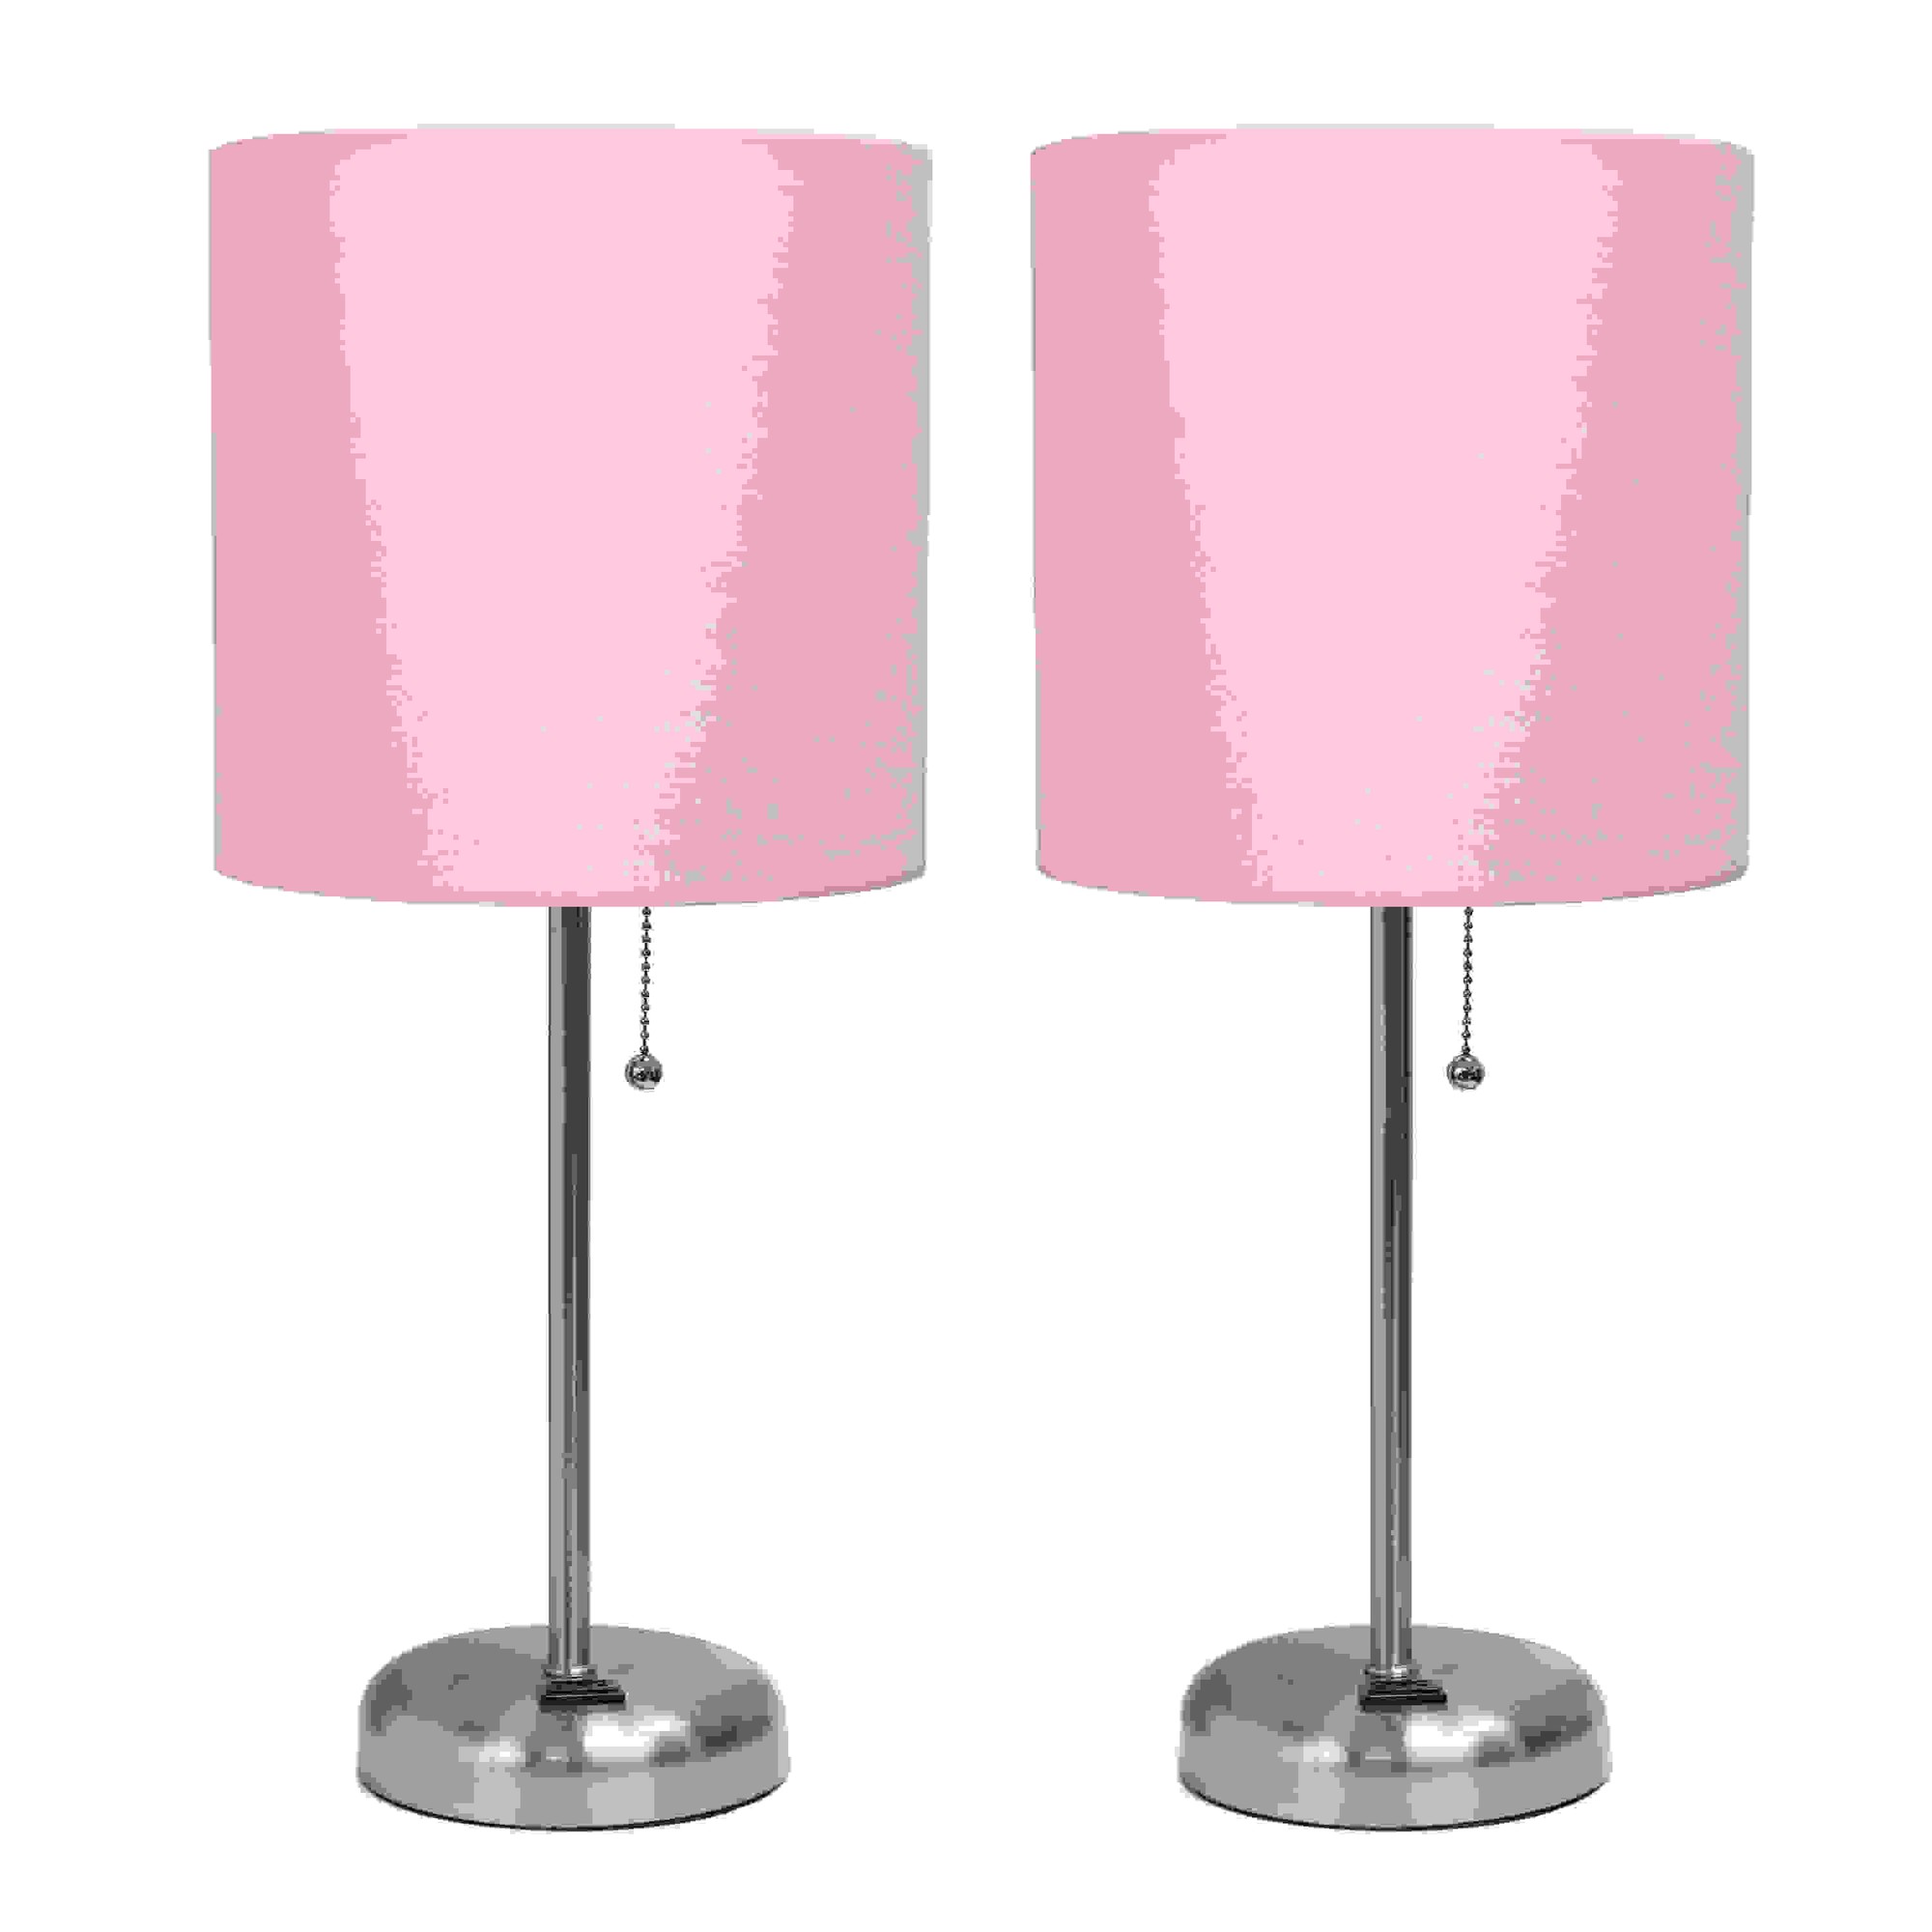 Simple Designs Brushed Steel Stick Lamp with Charging Outlet and Fabric Shade 2 Pack Set, Pink